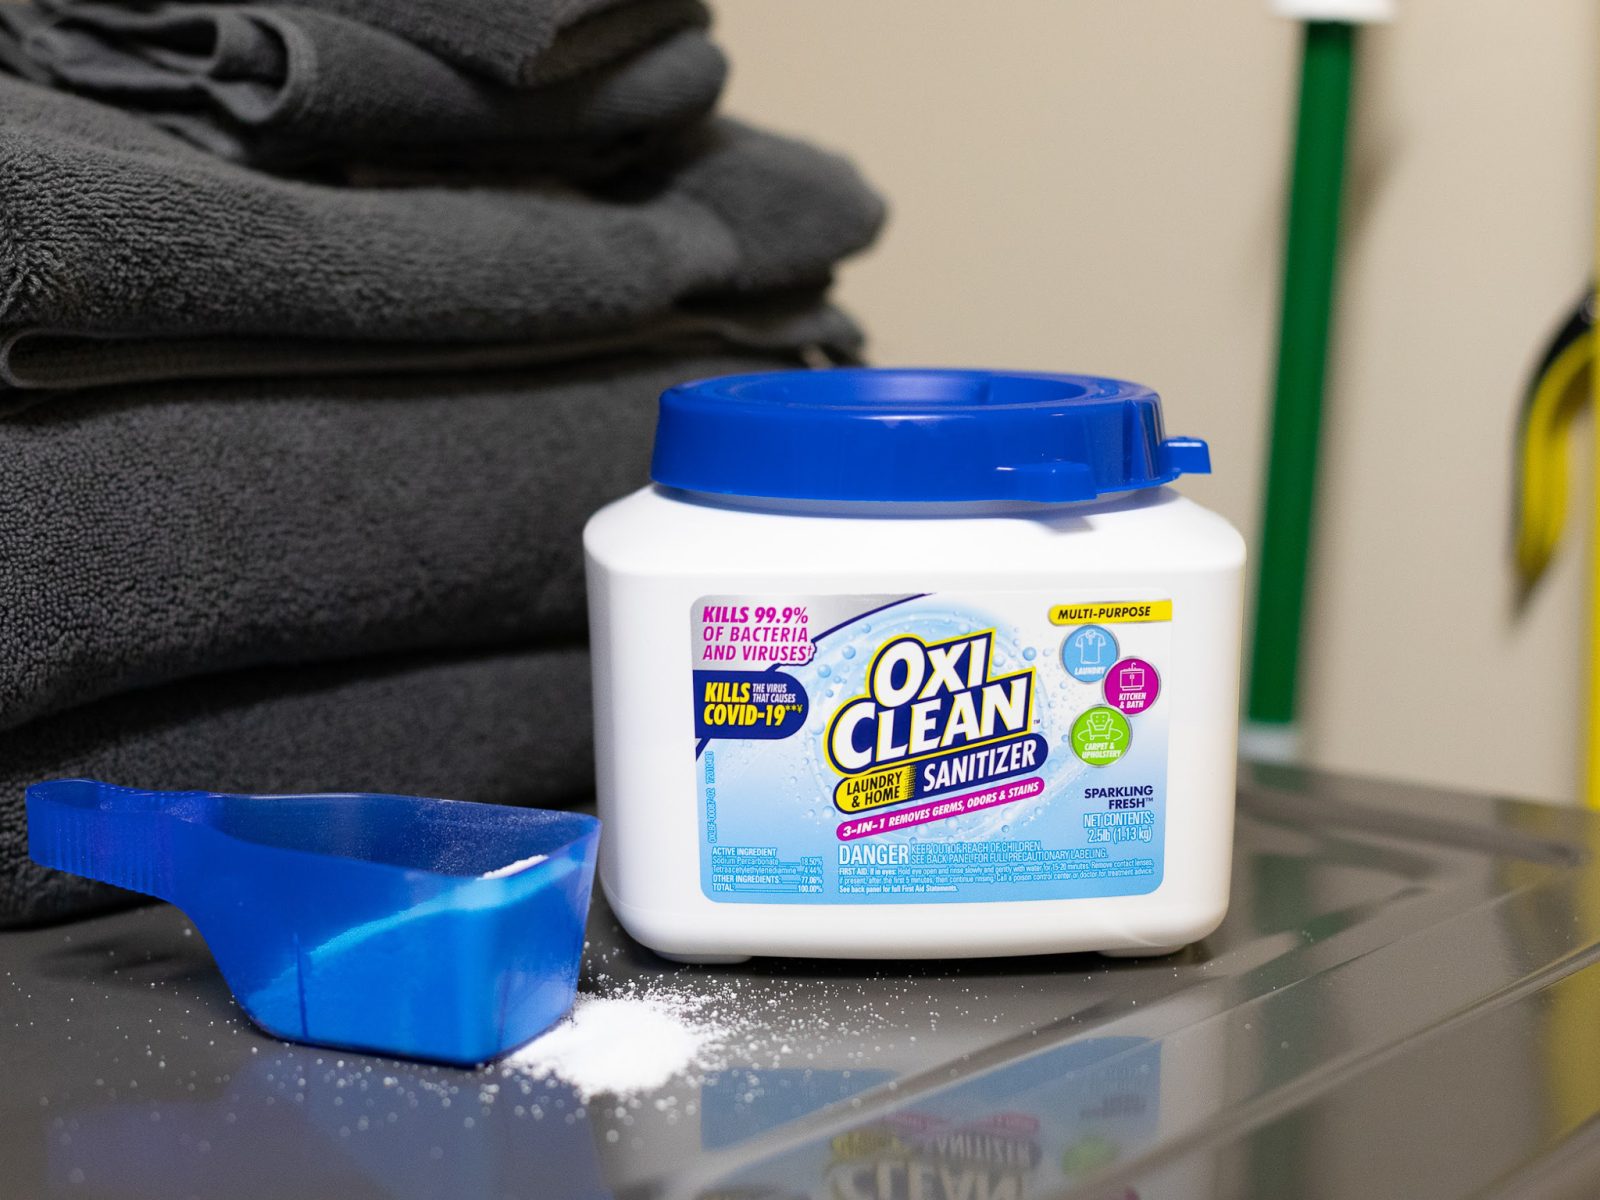 OxiClean Laundry & Home Sanitizer Tubs Just $7.49 At Kroger (Original Price $10.49)